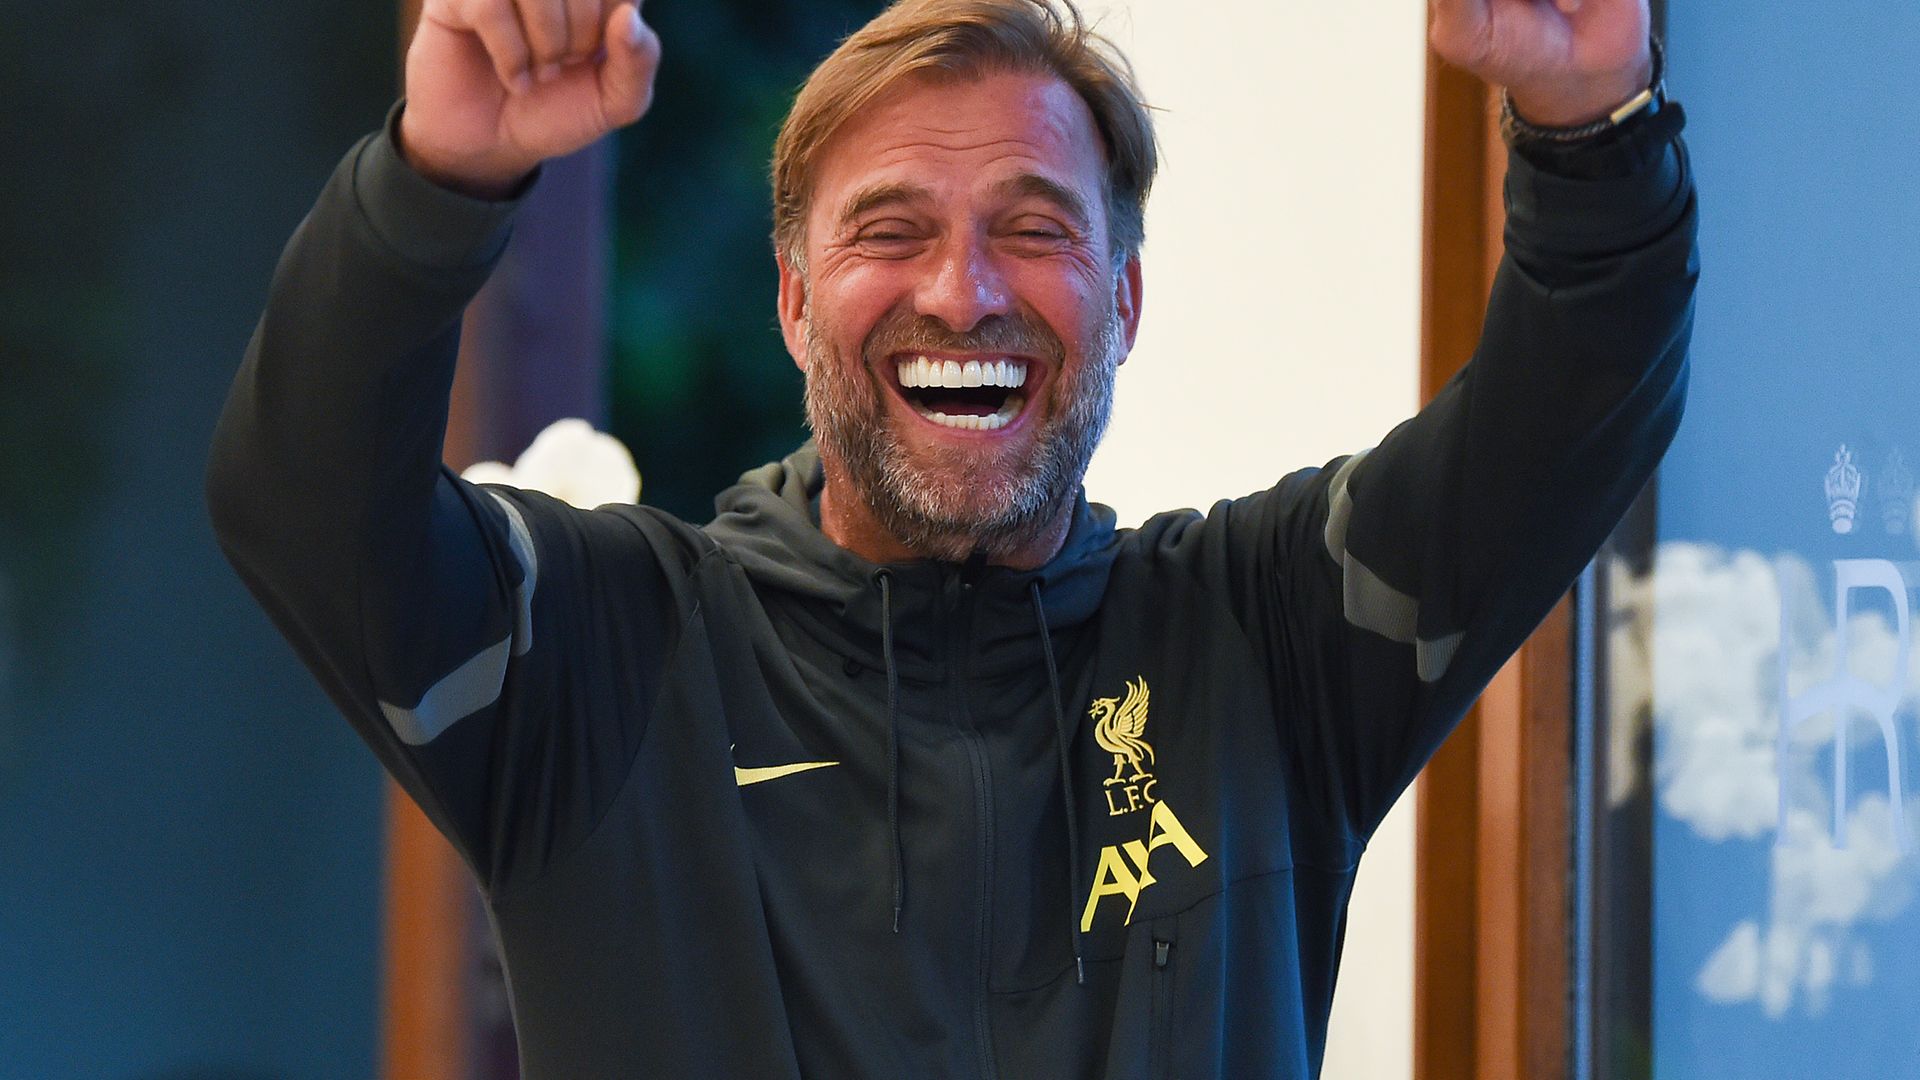 Liverpool manager Jurgen Klopp manager celebrates during a table tennis tournament at their pre-season training camp in  Evian-les-Bains, France - Credit: Photo by John Powell/Liverpool FC via Getty Images